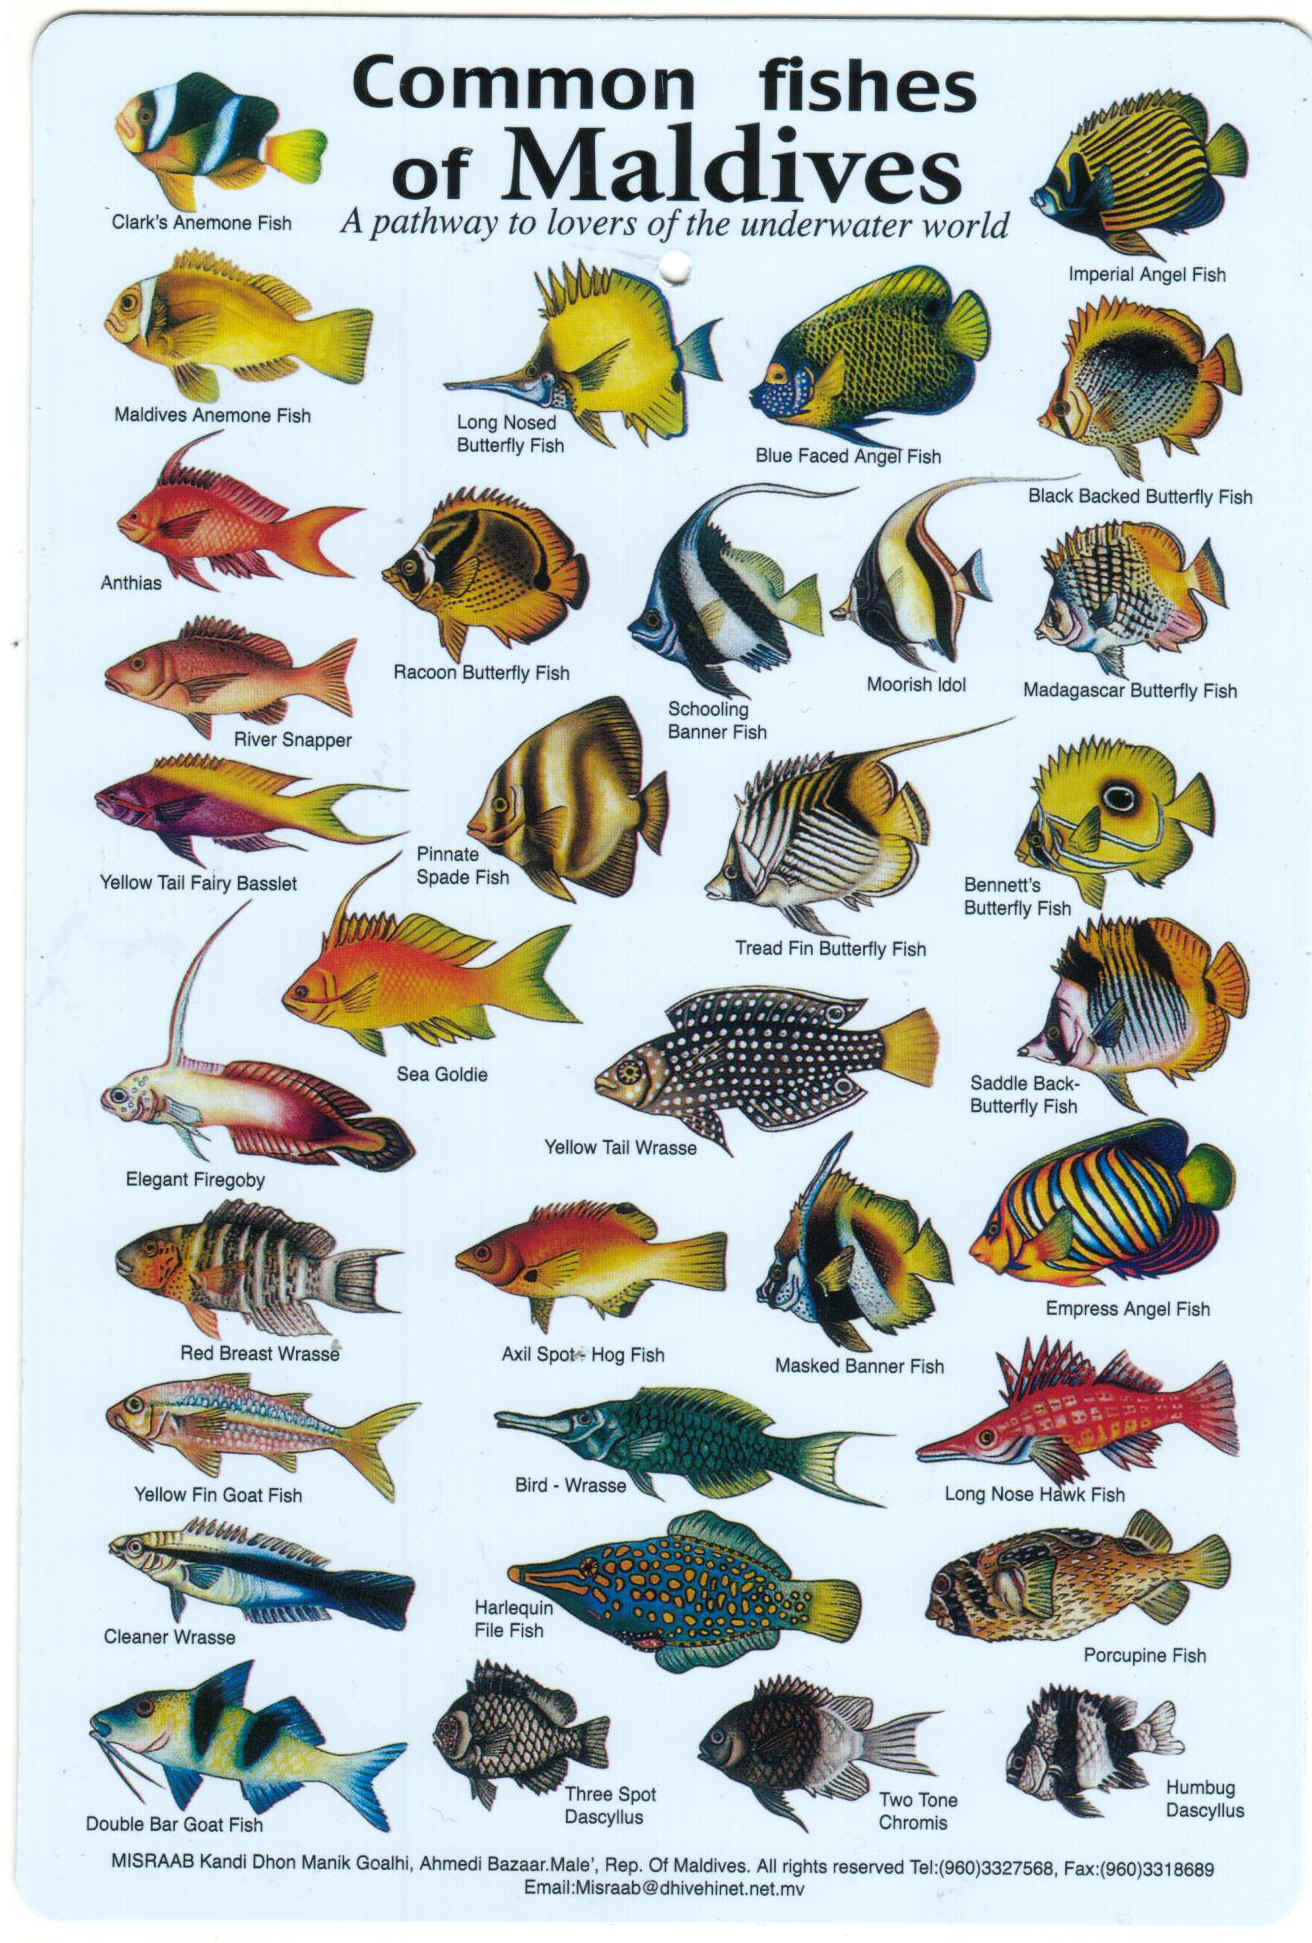 Fishes of the Maldives Identification Chart